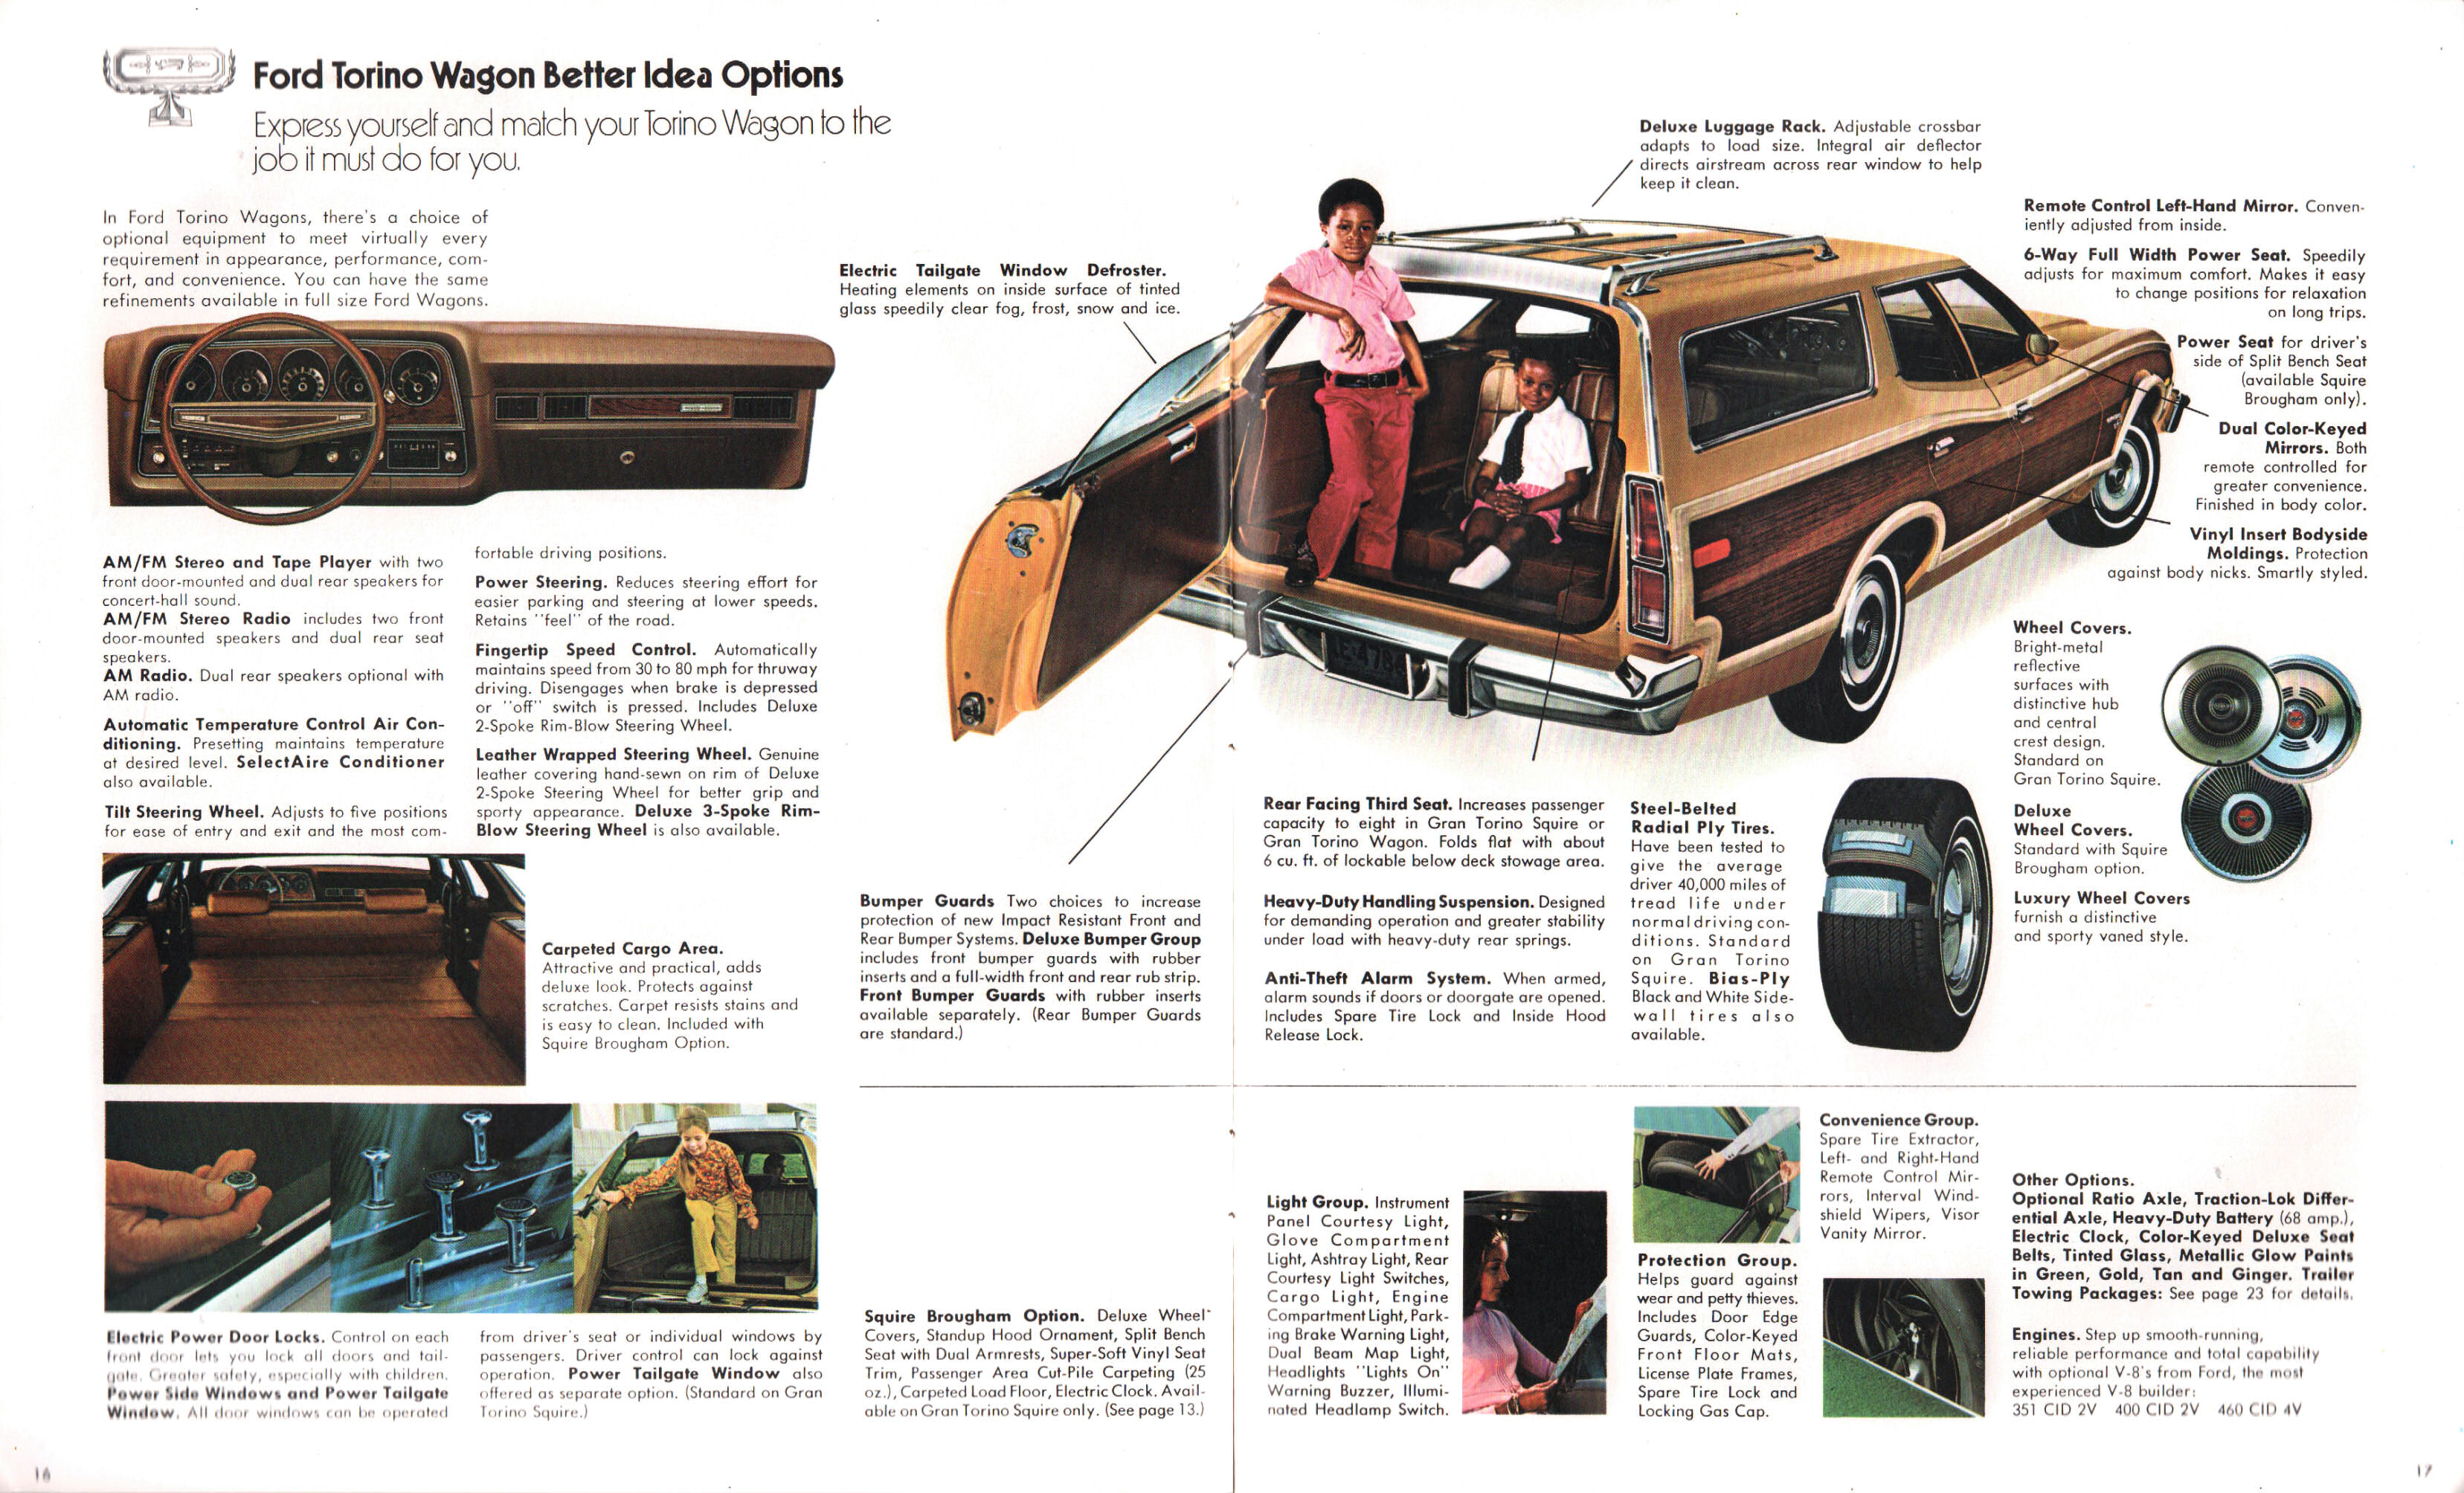 1974_Ford_Wagons-16-17